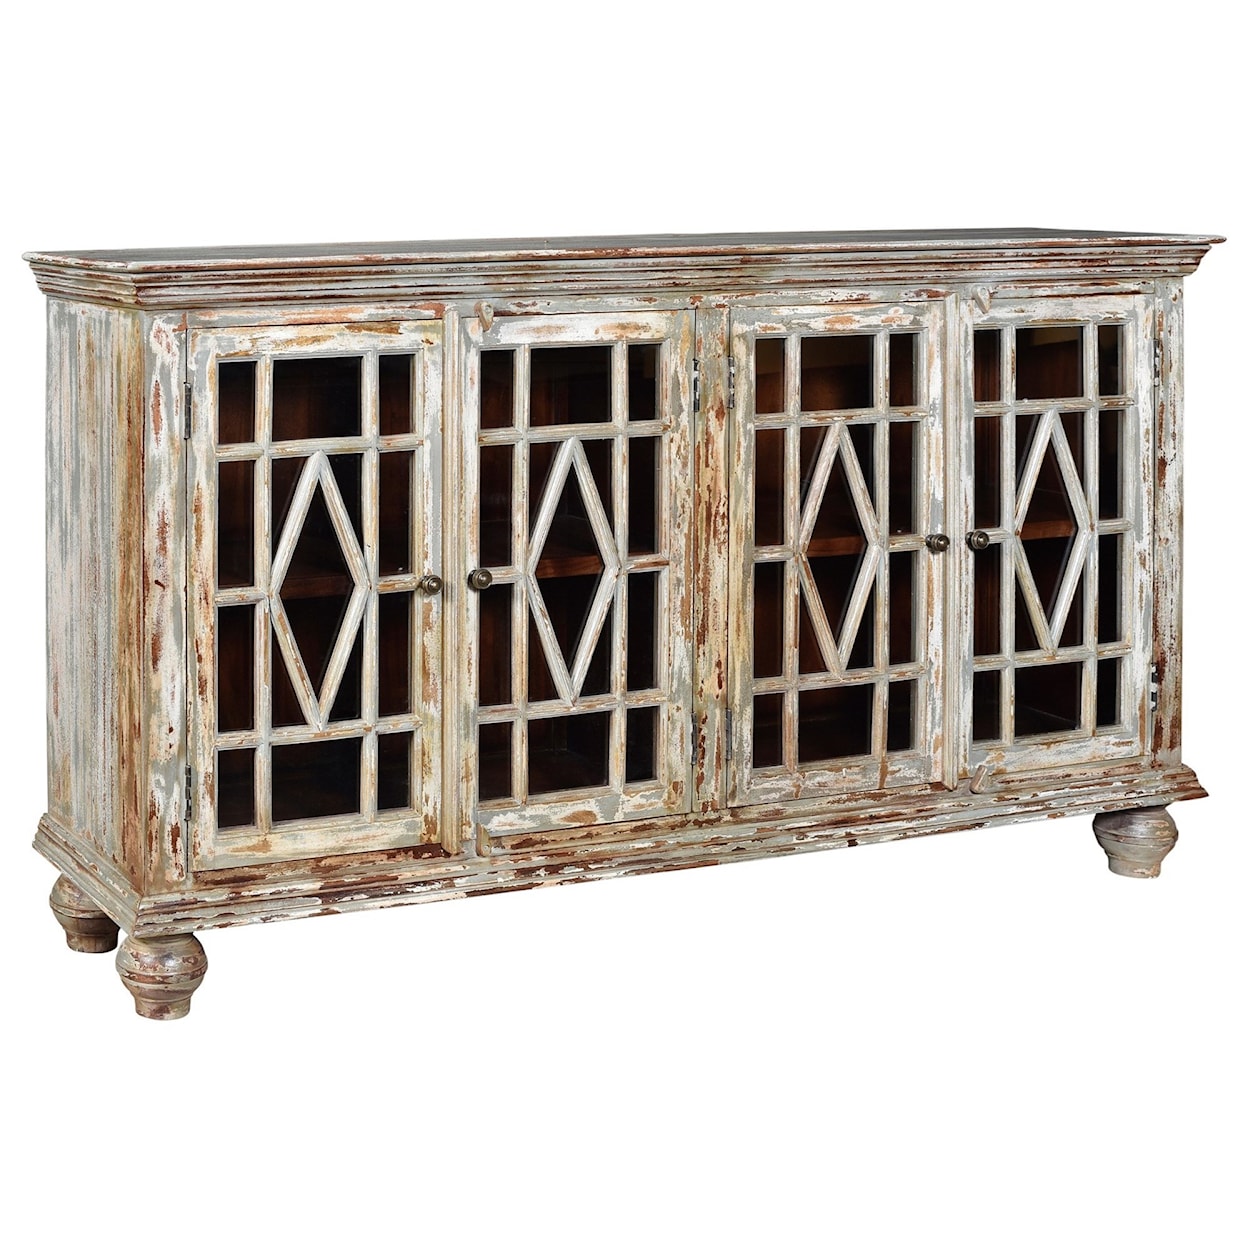 Crestview Collection Accent Furniture Bengal Manor Mango Wood Sideboard